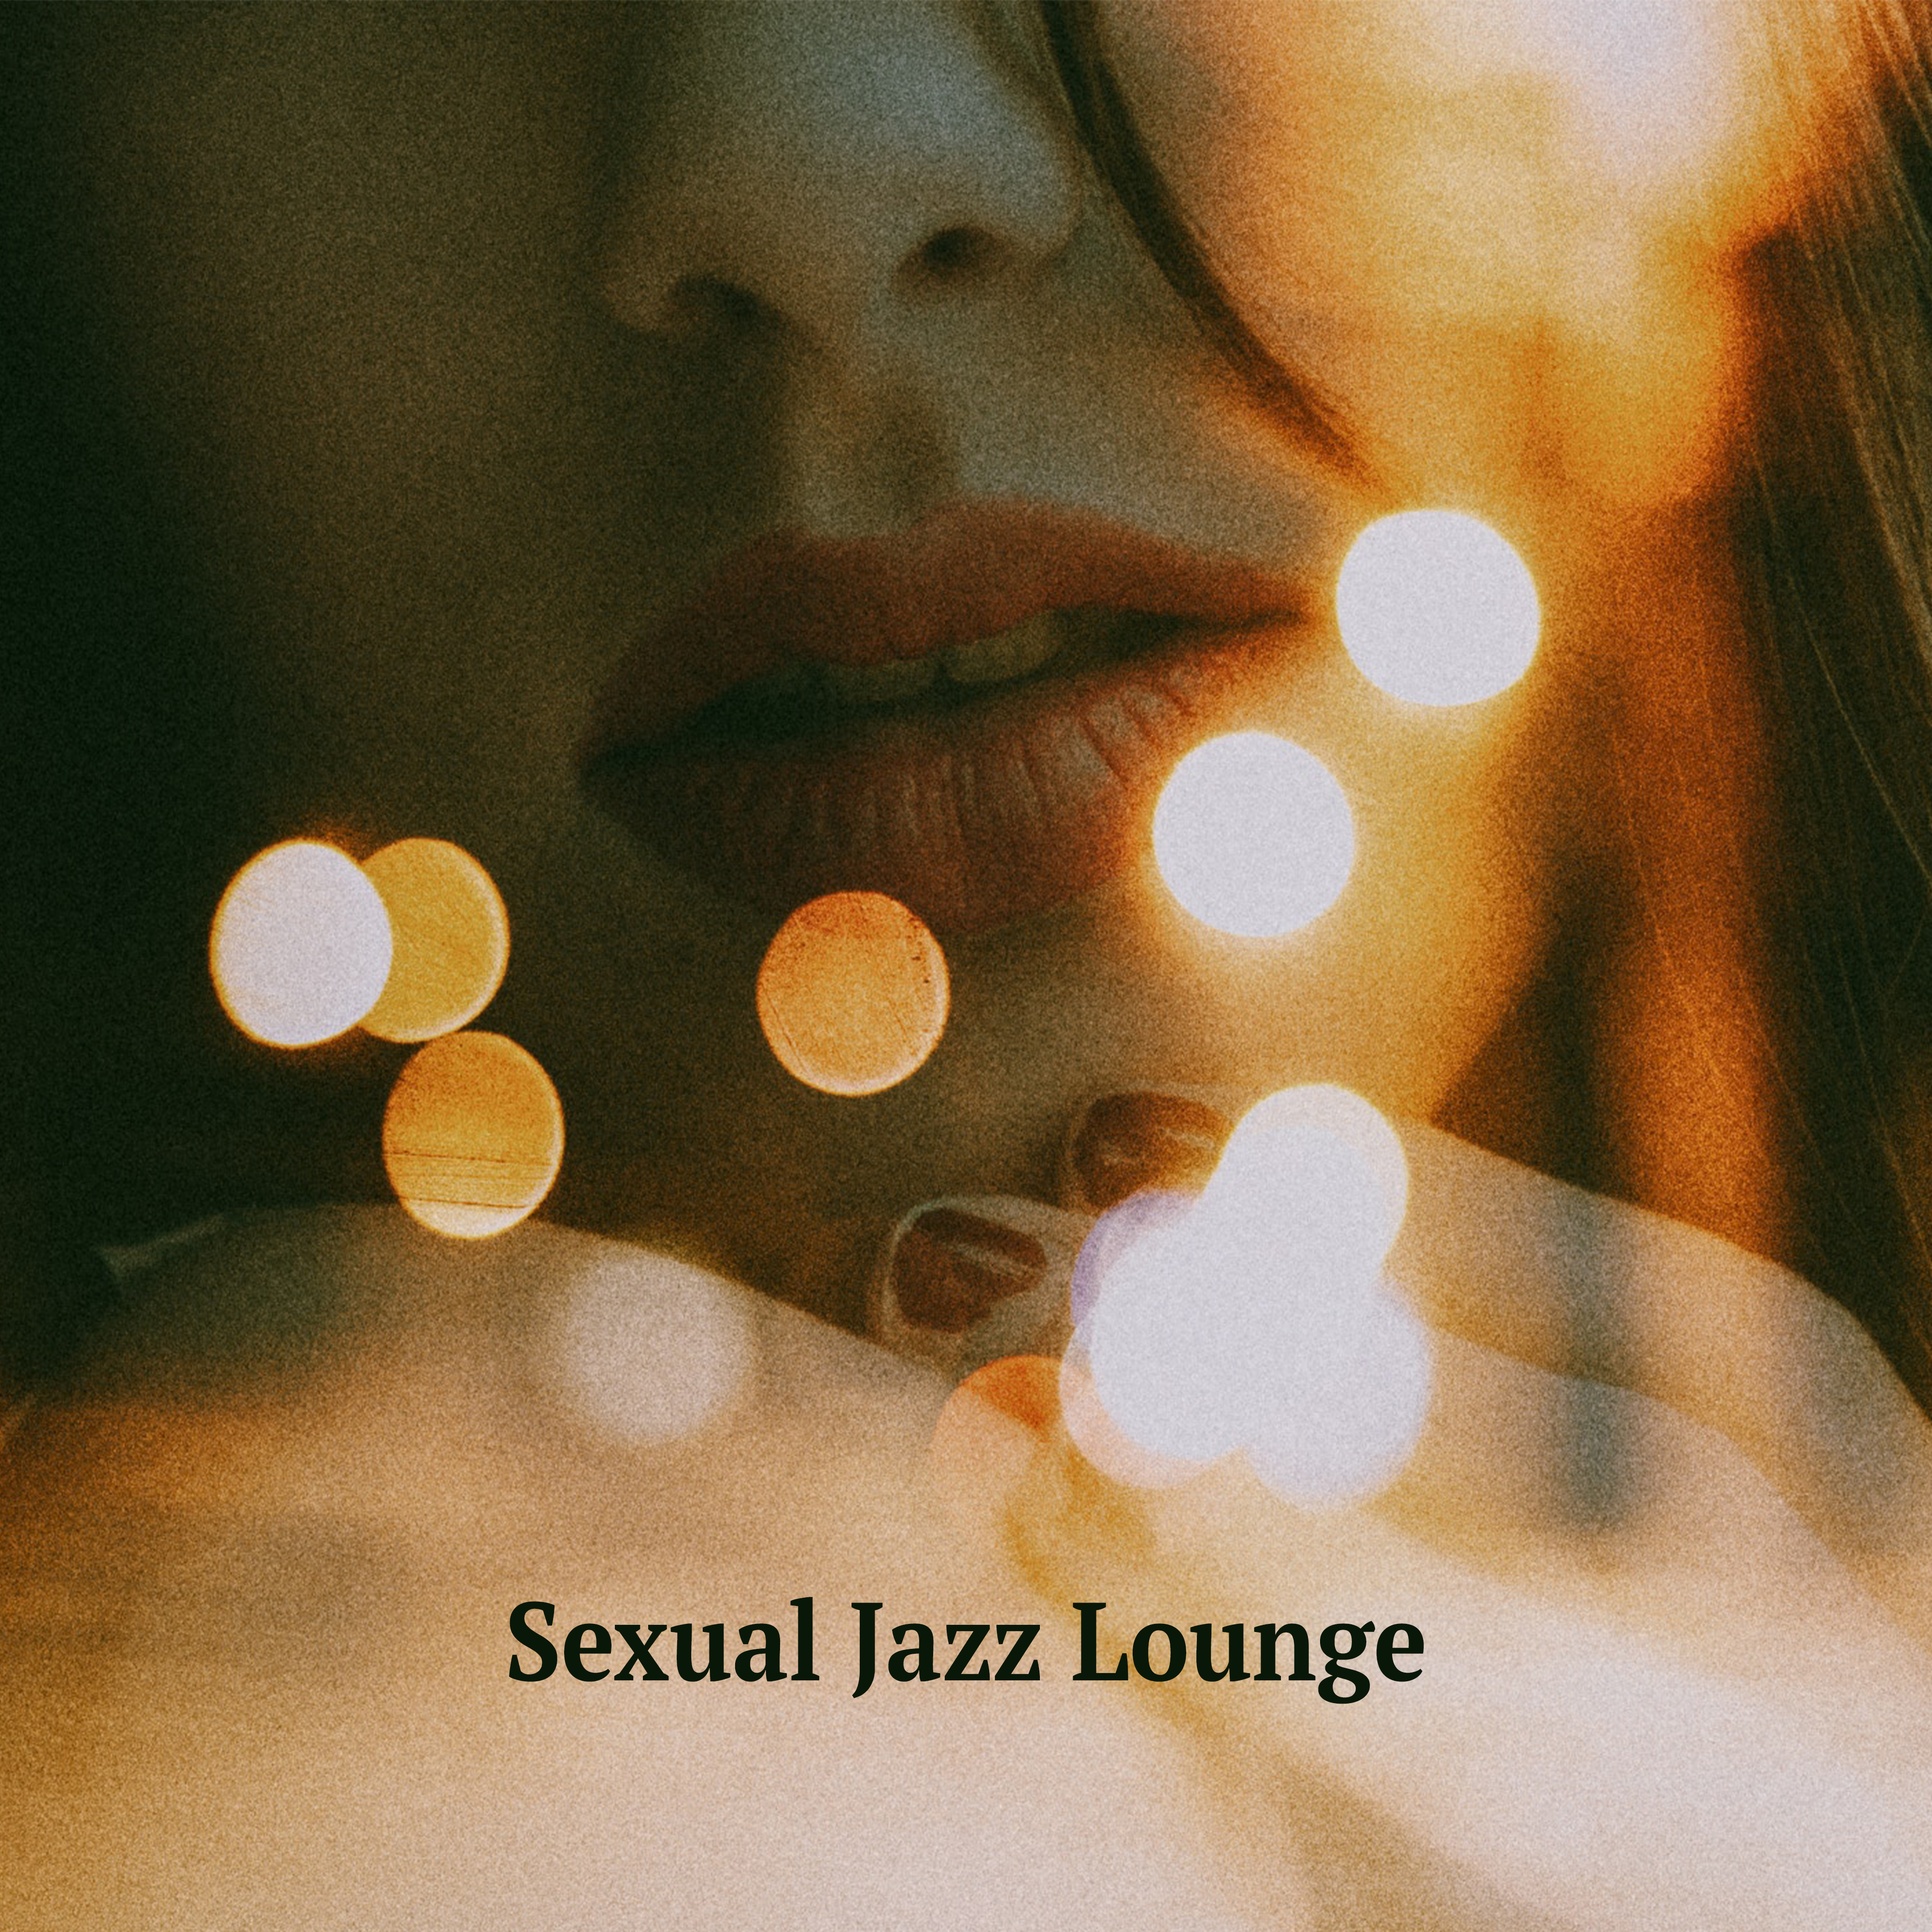 ****** Jazz Lounge – Erotic Lounge, Jazz for Lovers, Romantic Background Music, Sounds to Relax